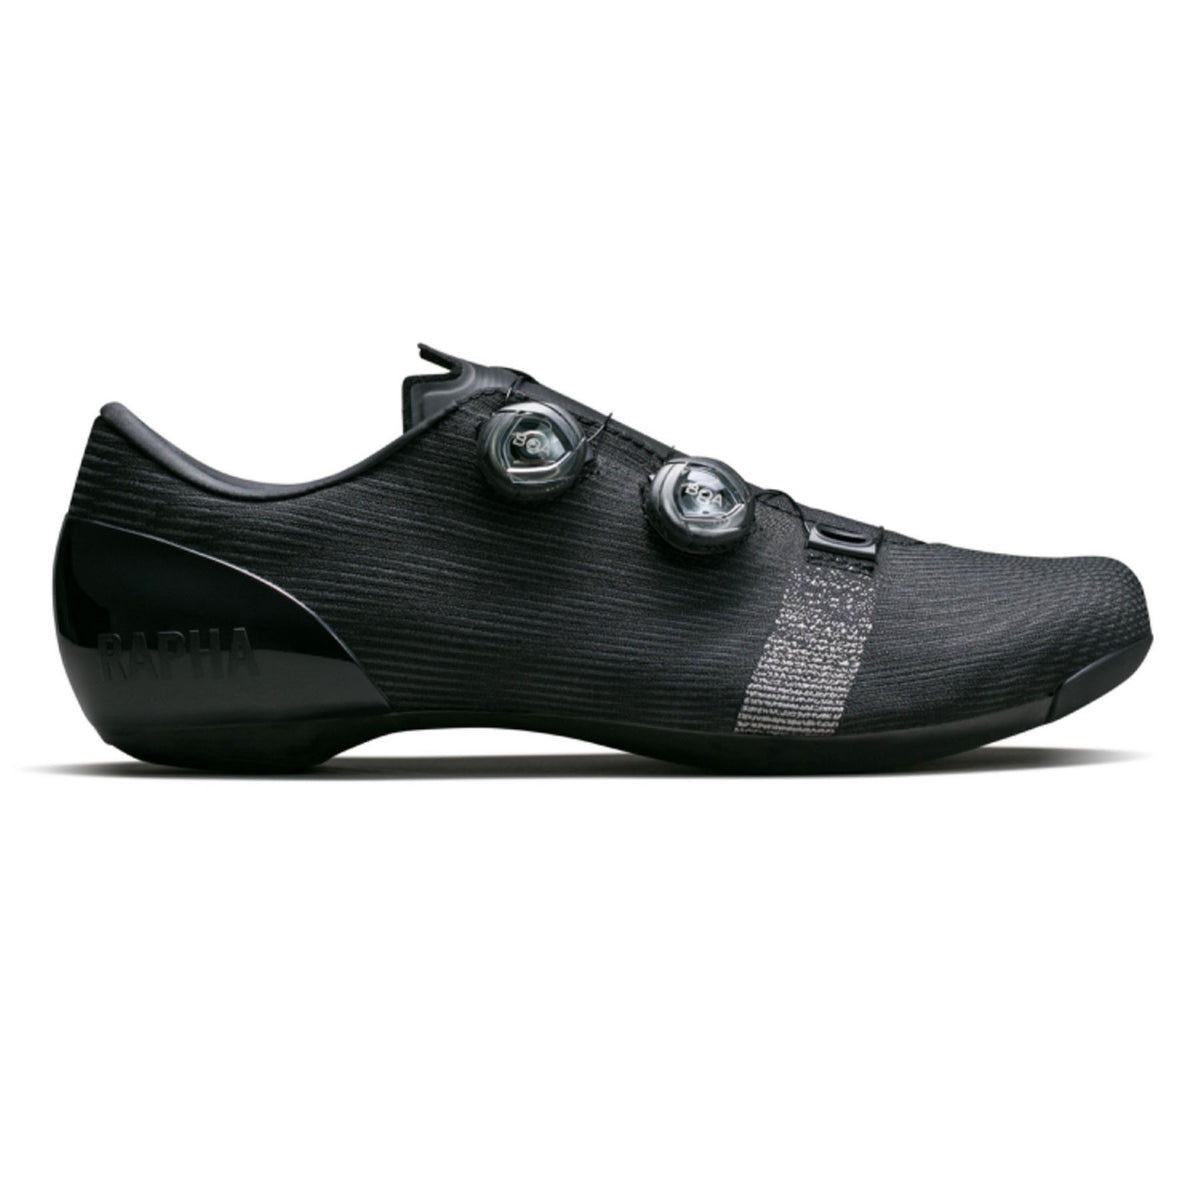 Hero image featuring the side of the Rapha Pro Team Shoes in black.